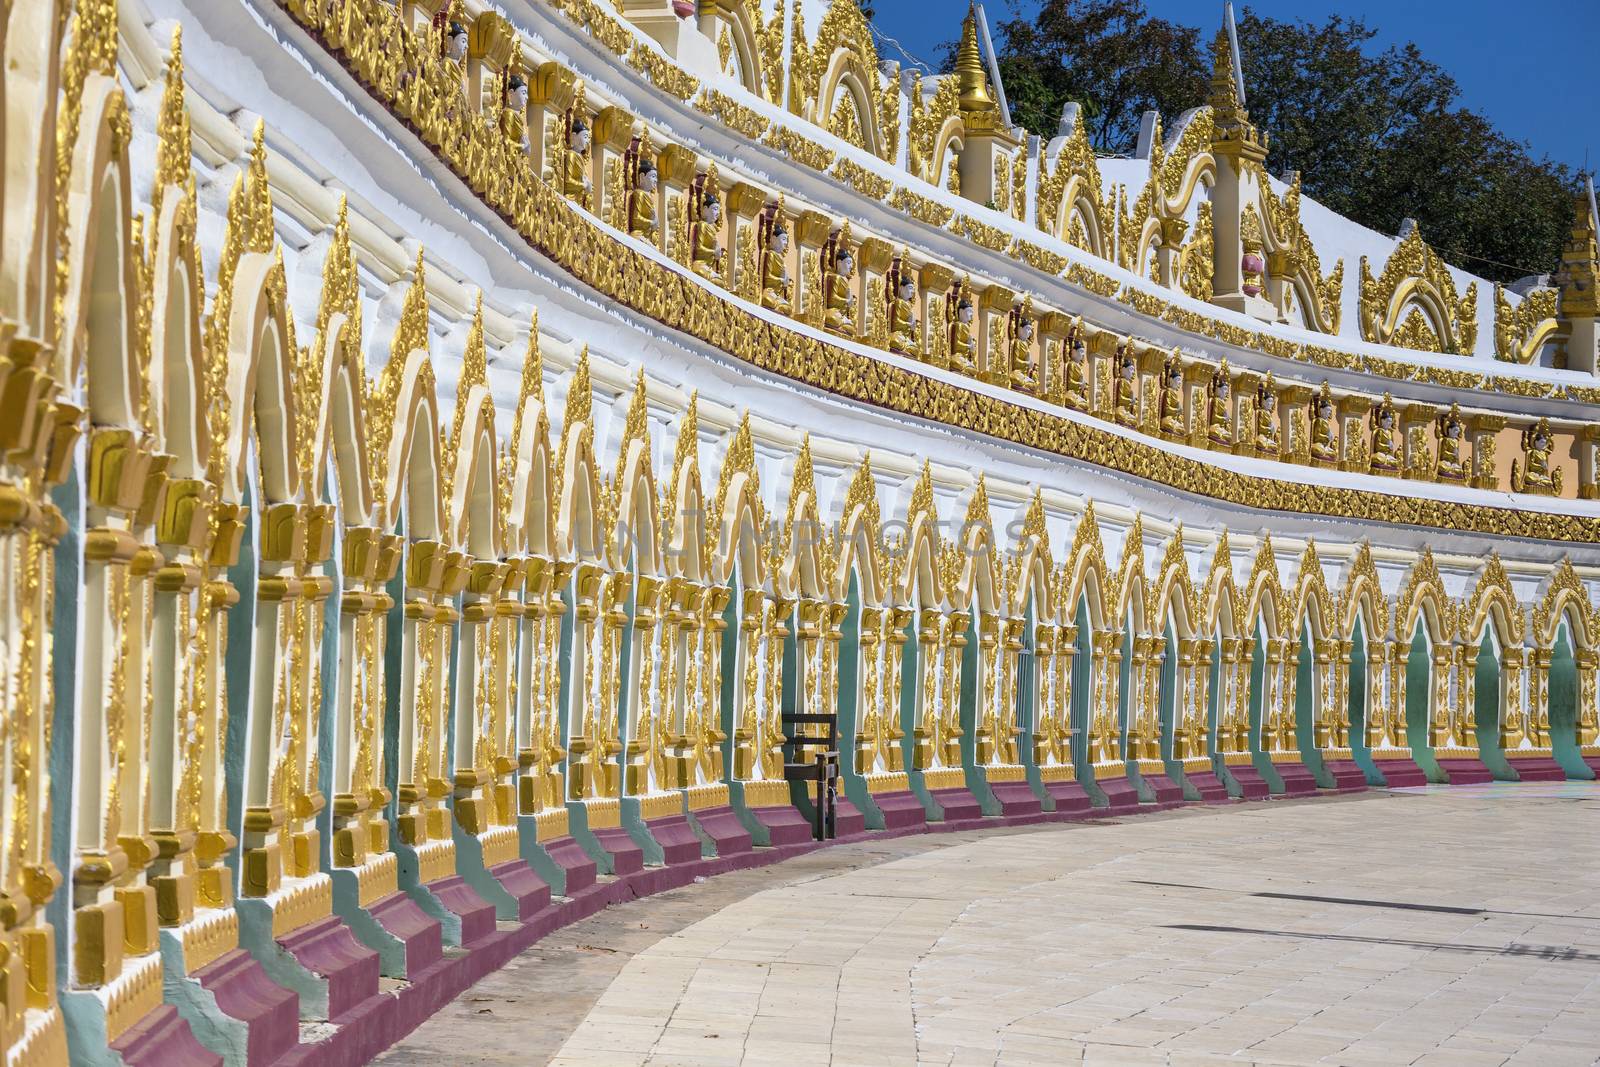 Umin Thounzeh temple in myanmar by cozyta